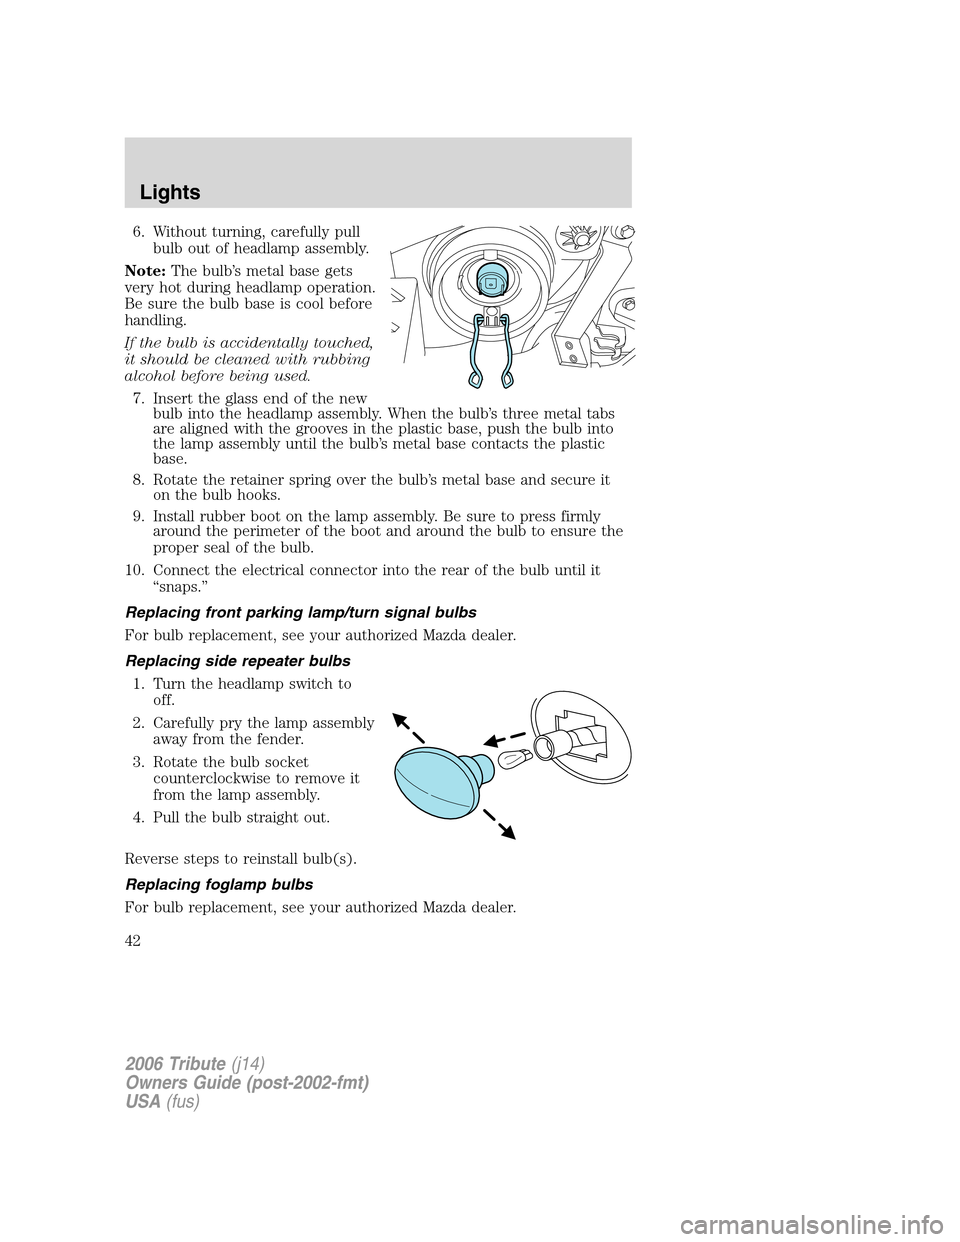 MAZDA MODEL TRIBUTE 2006  Owners Manual (in English) 6. Without turning, carefully pull
bulb out of headlamp assembly.
Note:The bulb’s metal base gets
very hot during headlamp operation.
Be sure the bulb base is cool before
handling.
If the bulb is ac